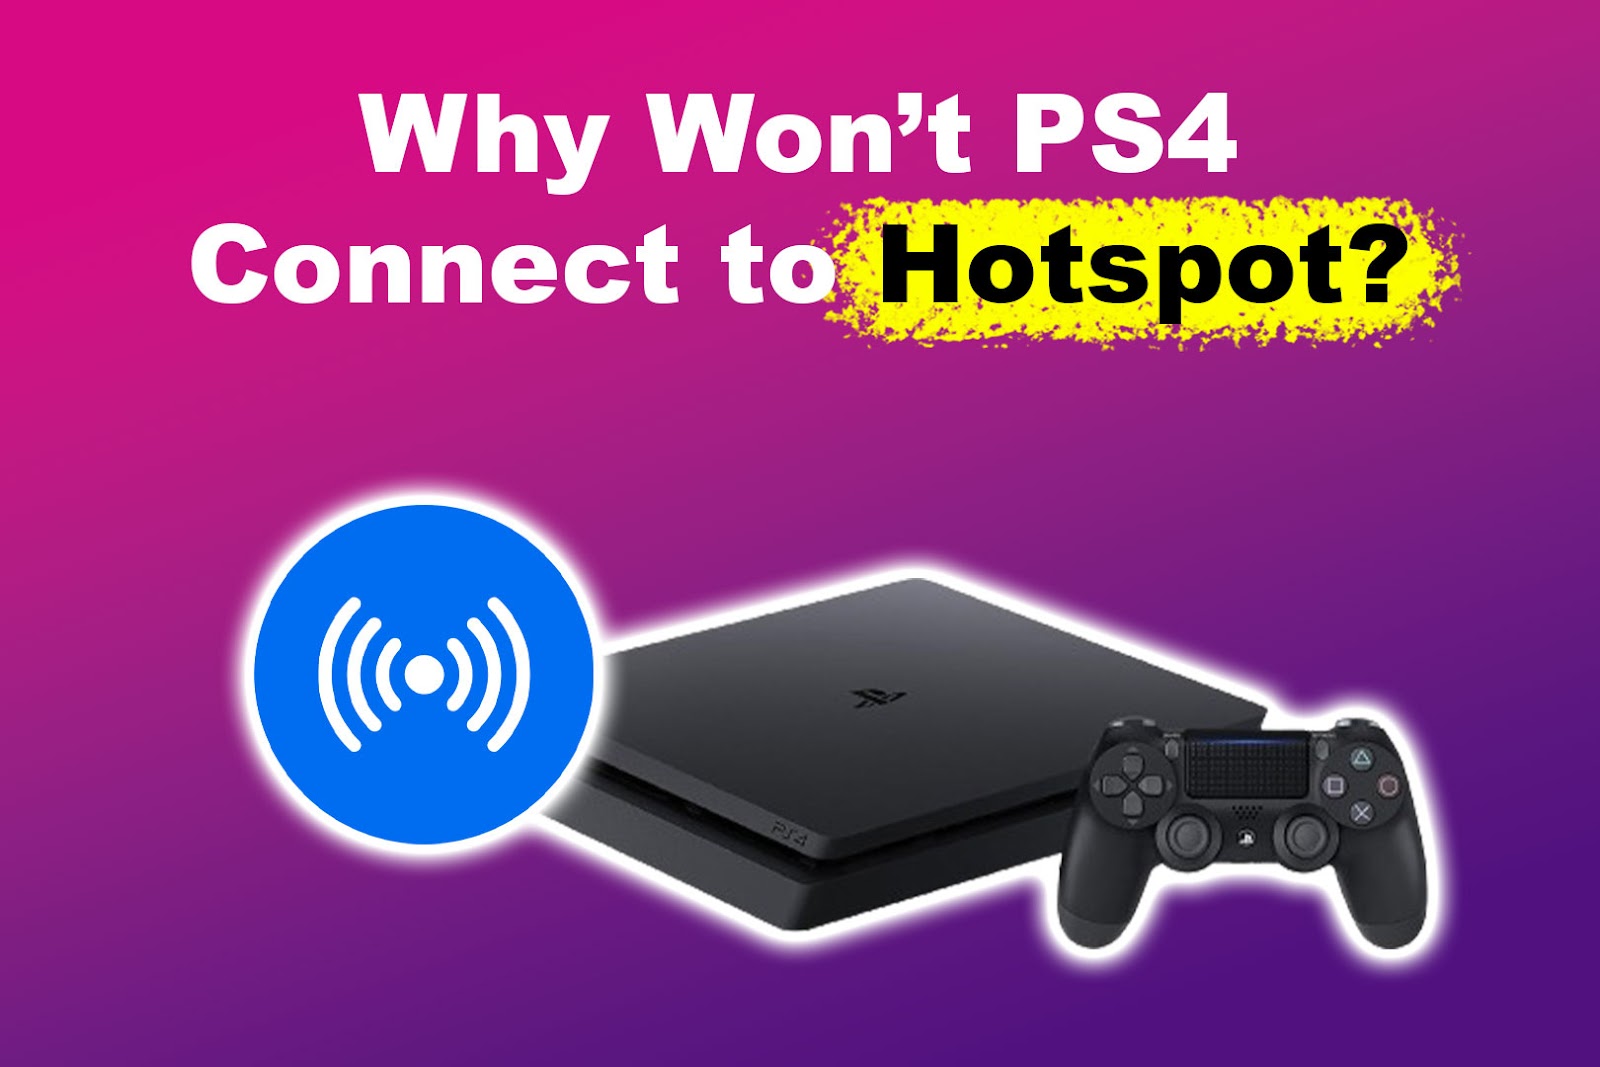 Why Won’t PS4 Connect to Hotspot